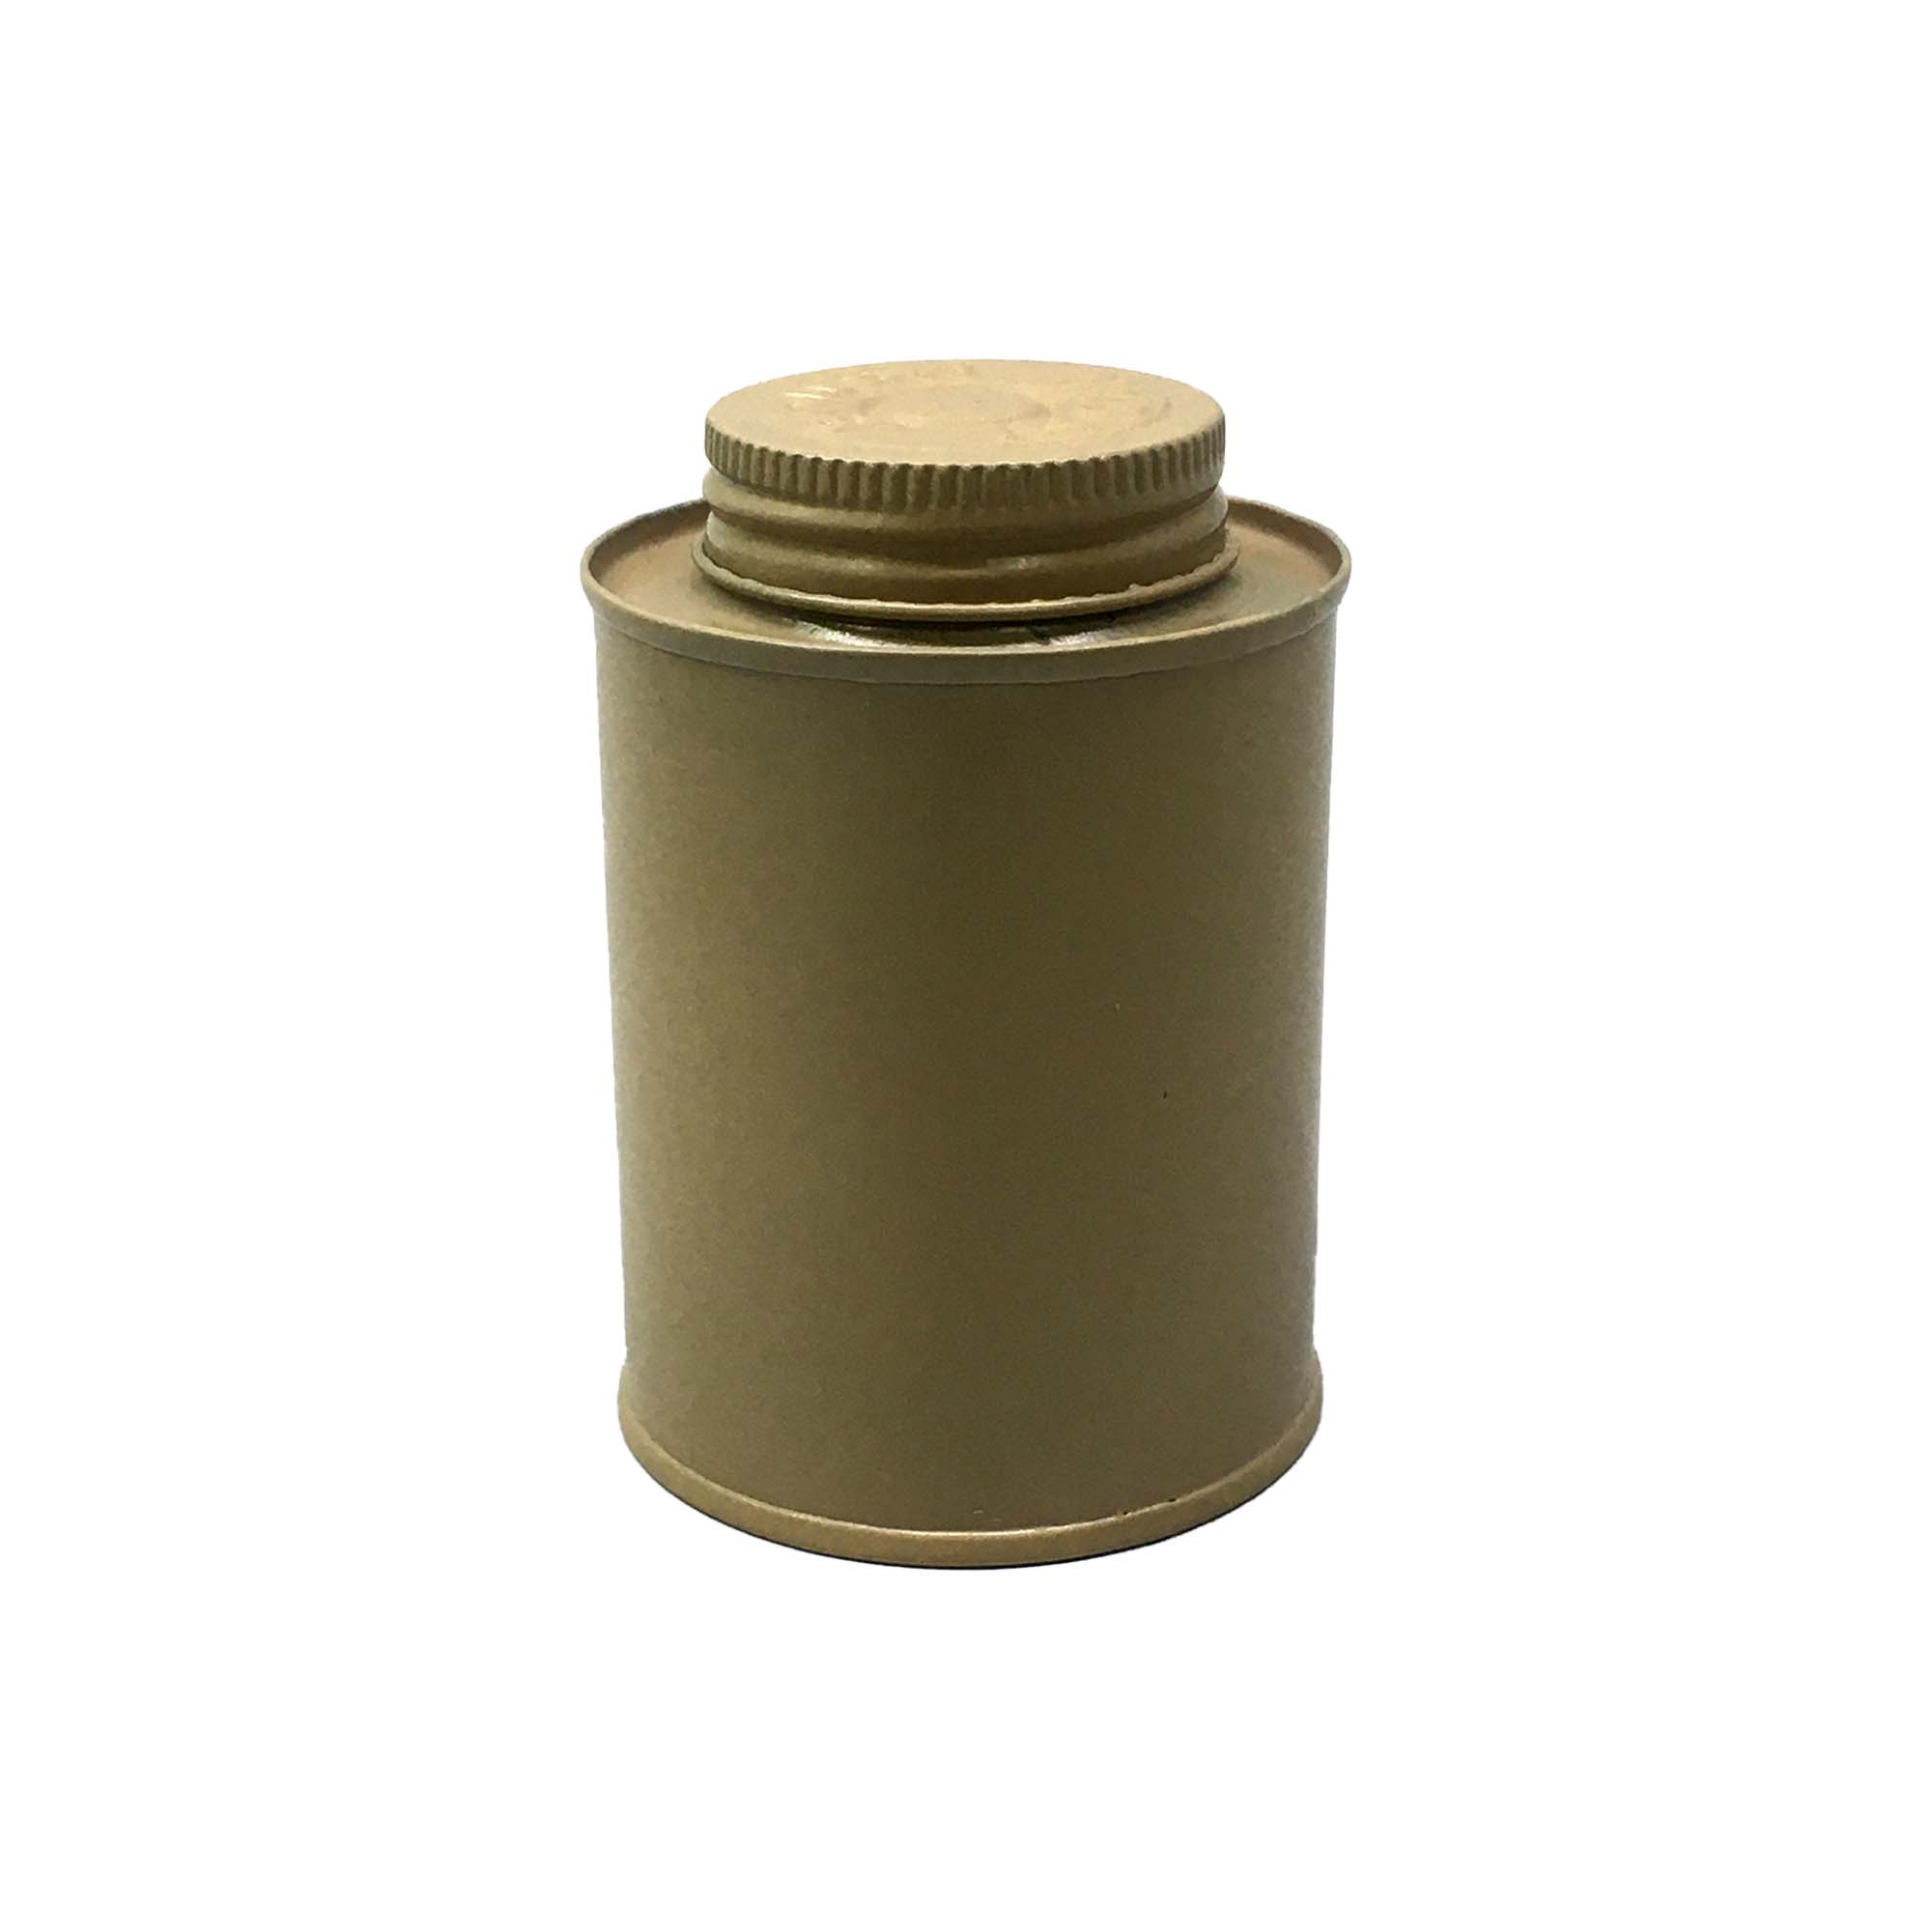 Vintage Spice Tin Canister Gold 6x9.5cm